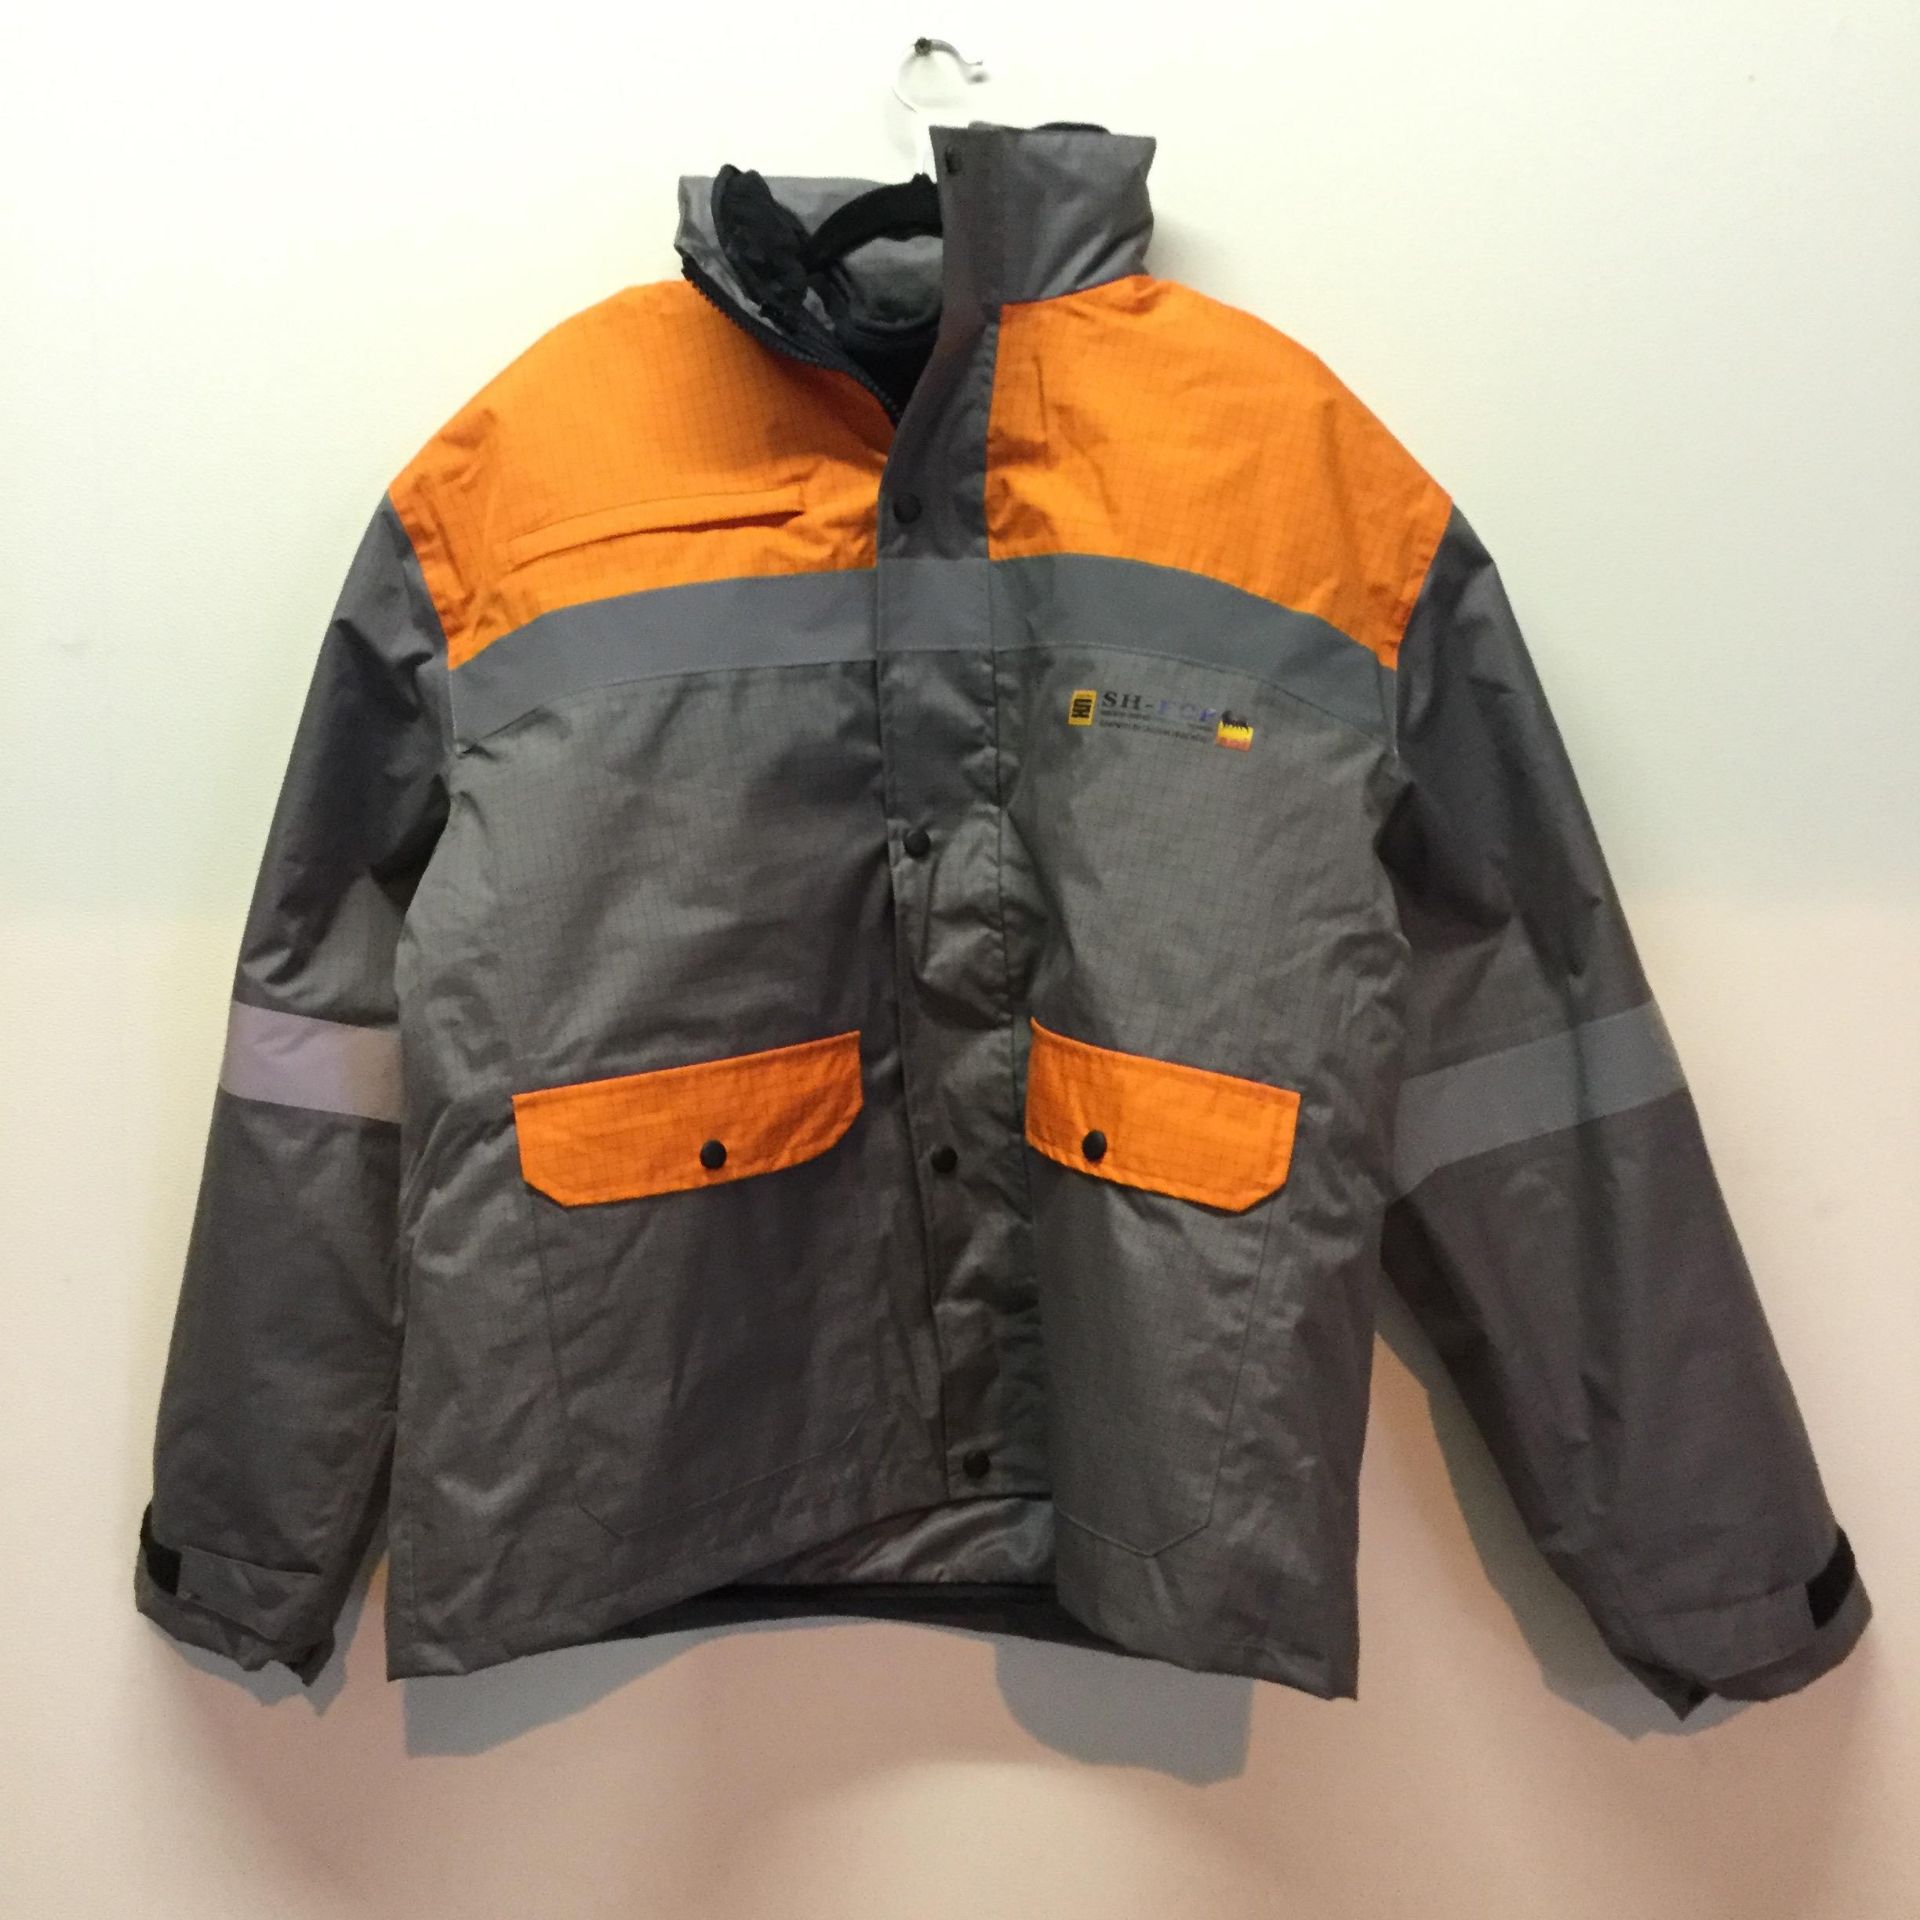 All Weather 3 layer Gortex Antistatic waterproof Jackets - Size 60